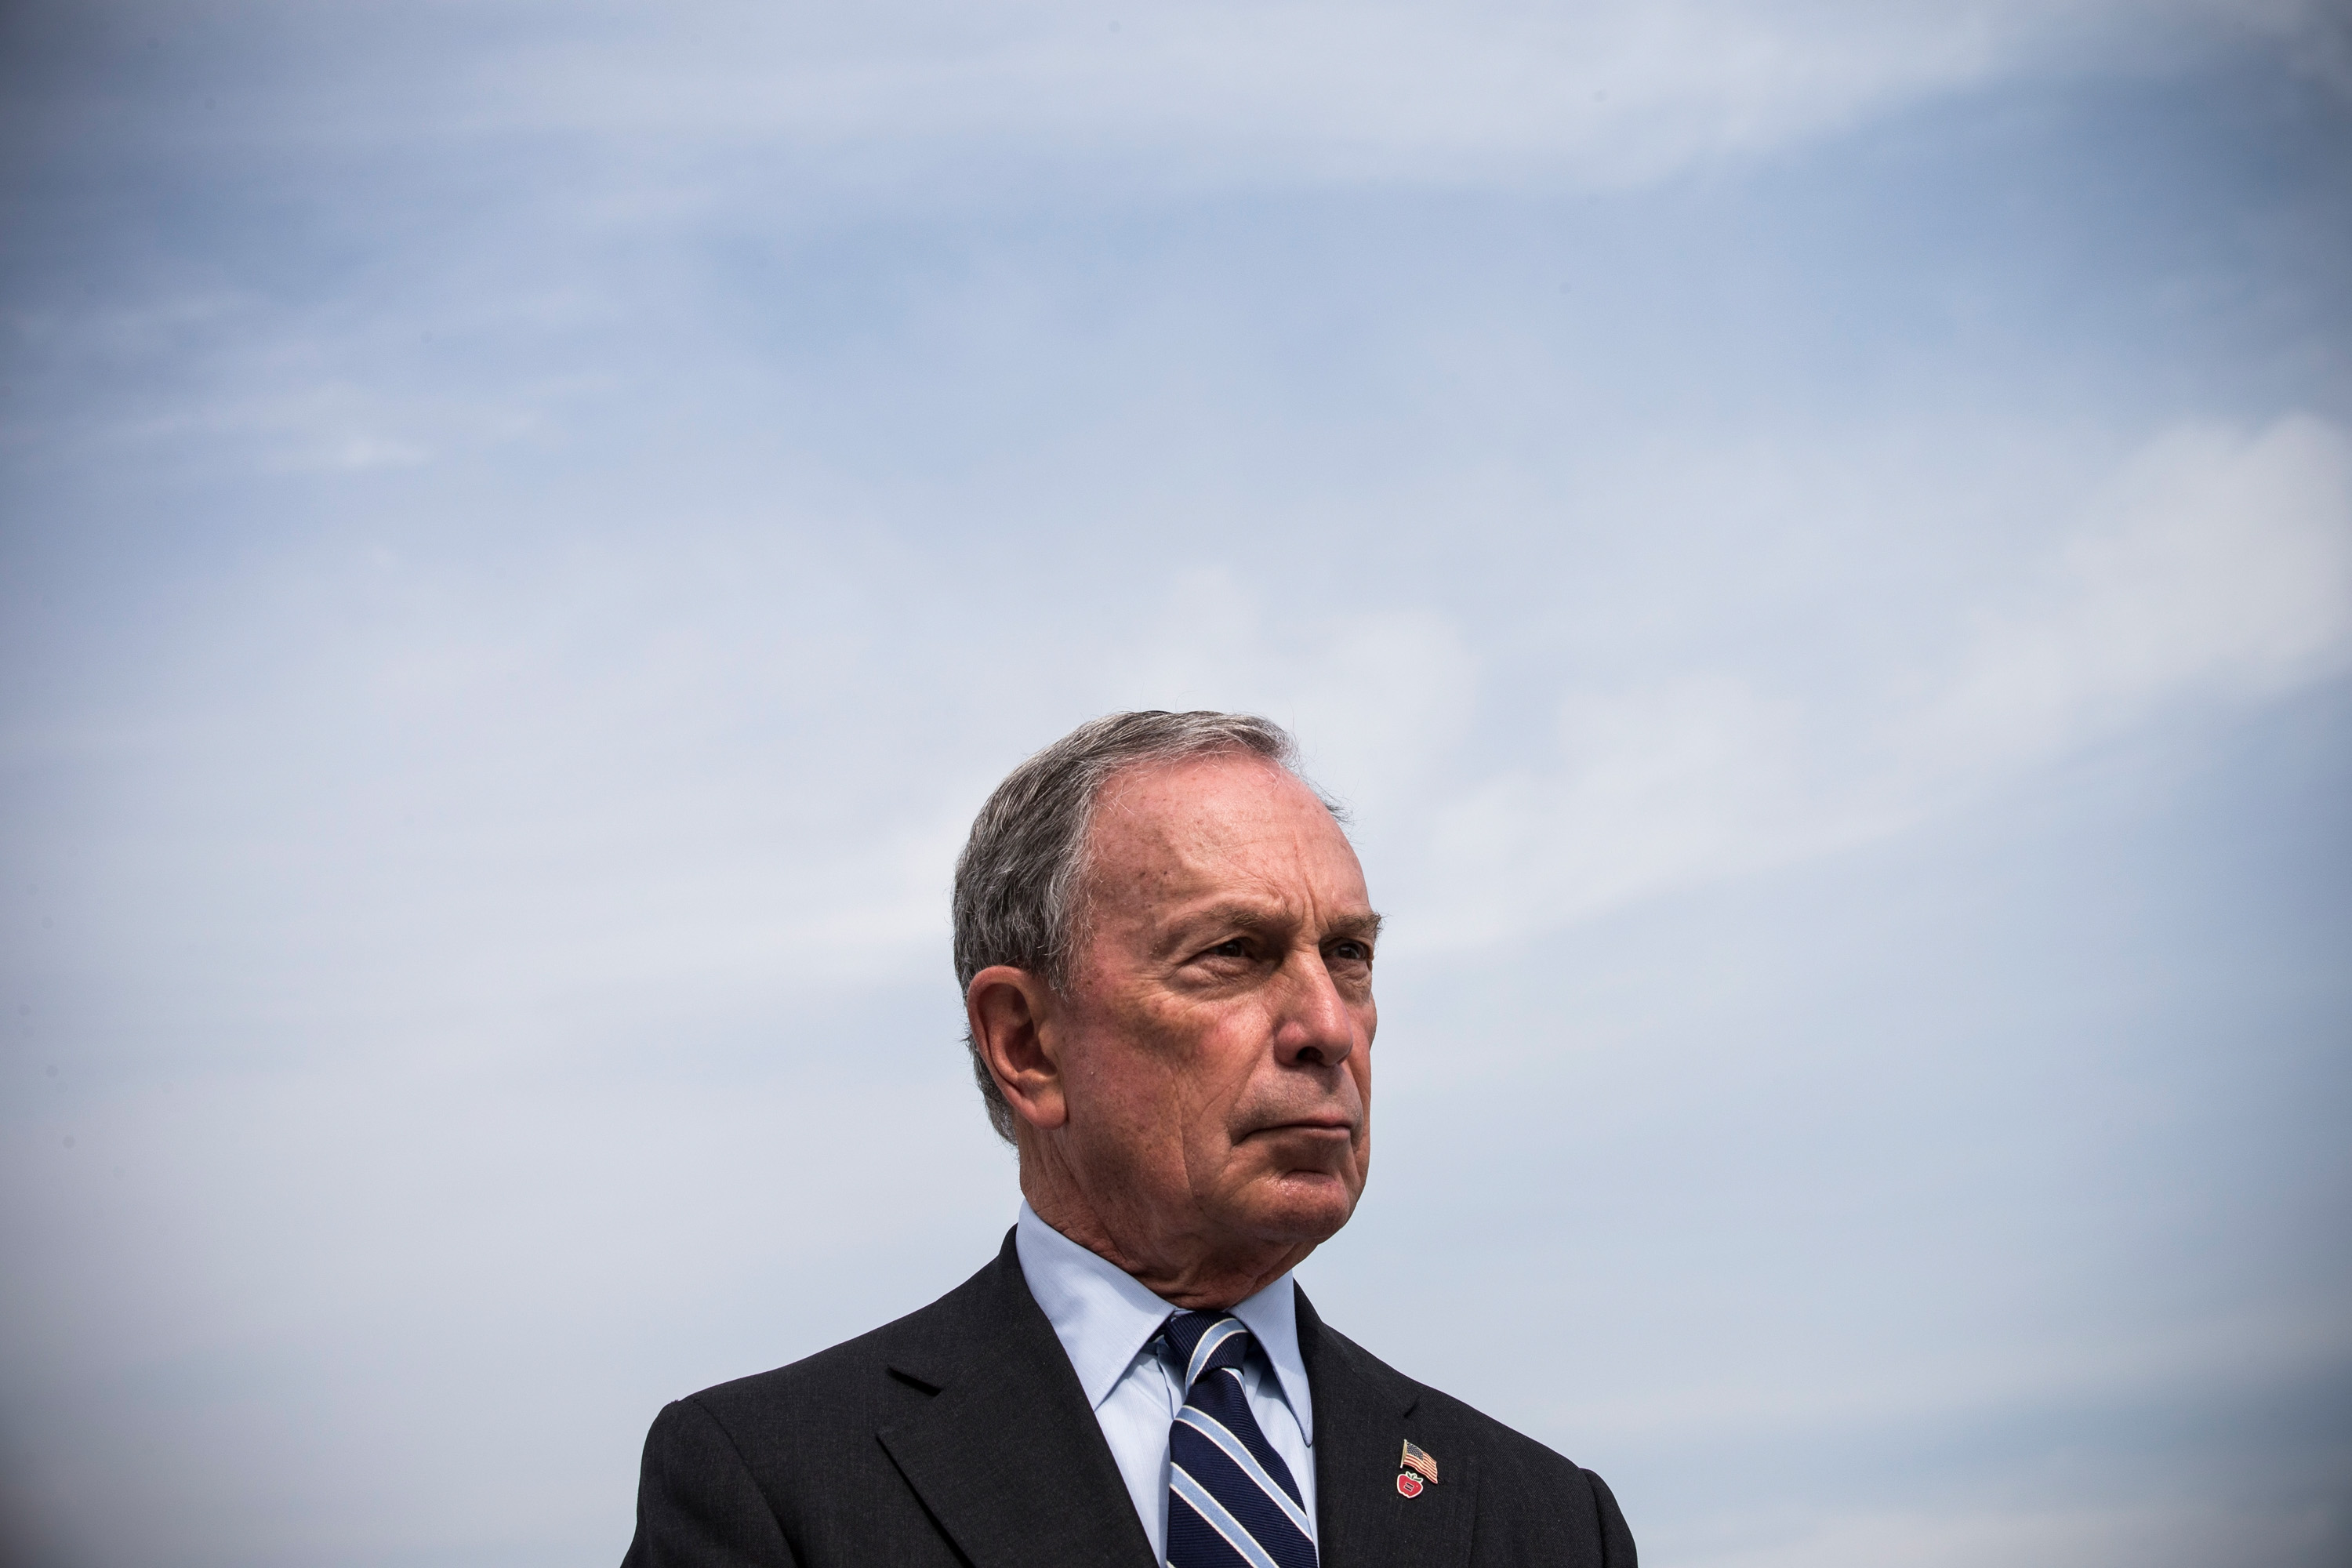 Former New York City Mayor Michael Bloomberg unveils a Hurricane Sandy Recovery Report at a press conference with U.S. Secretary for Housing and Urban Development Shaun Donovan (not seen) on Aug. 19, 2013 in the Brooklyn Borough of New York City.